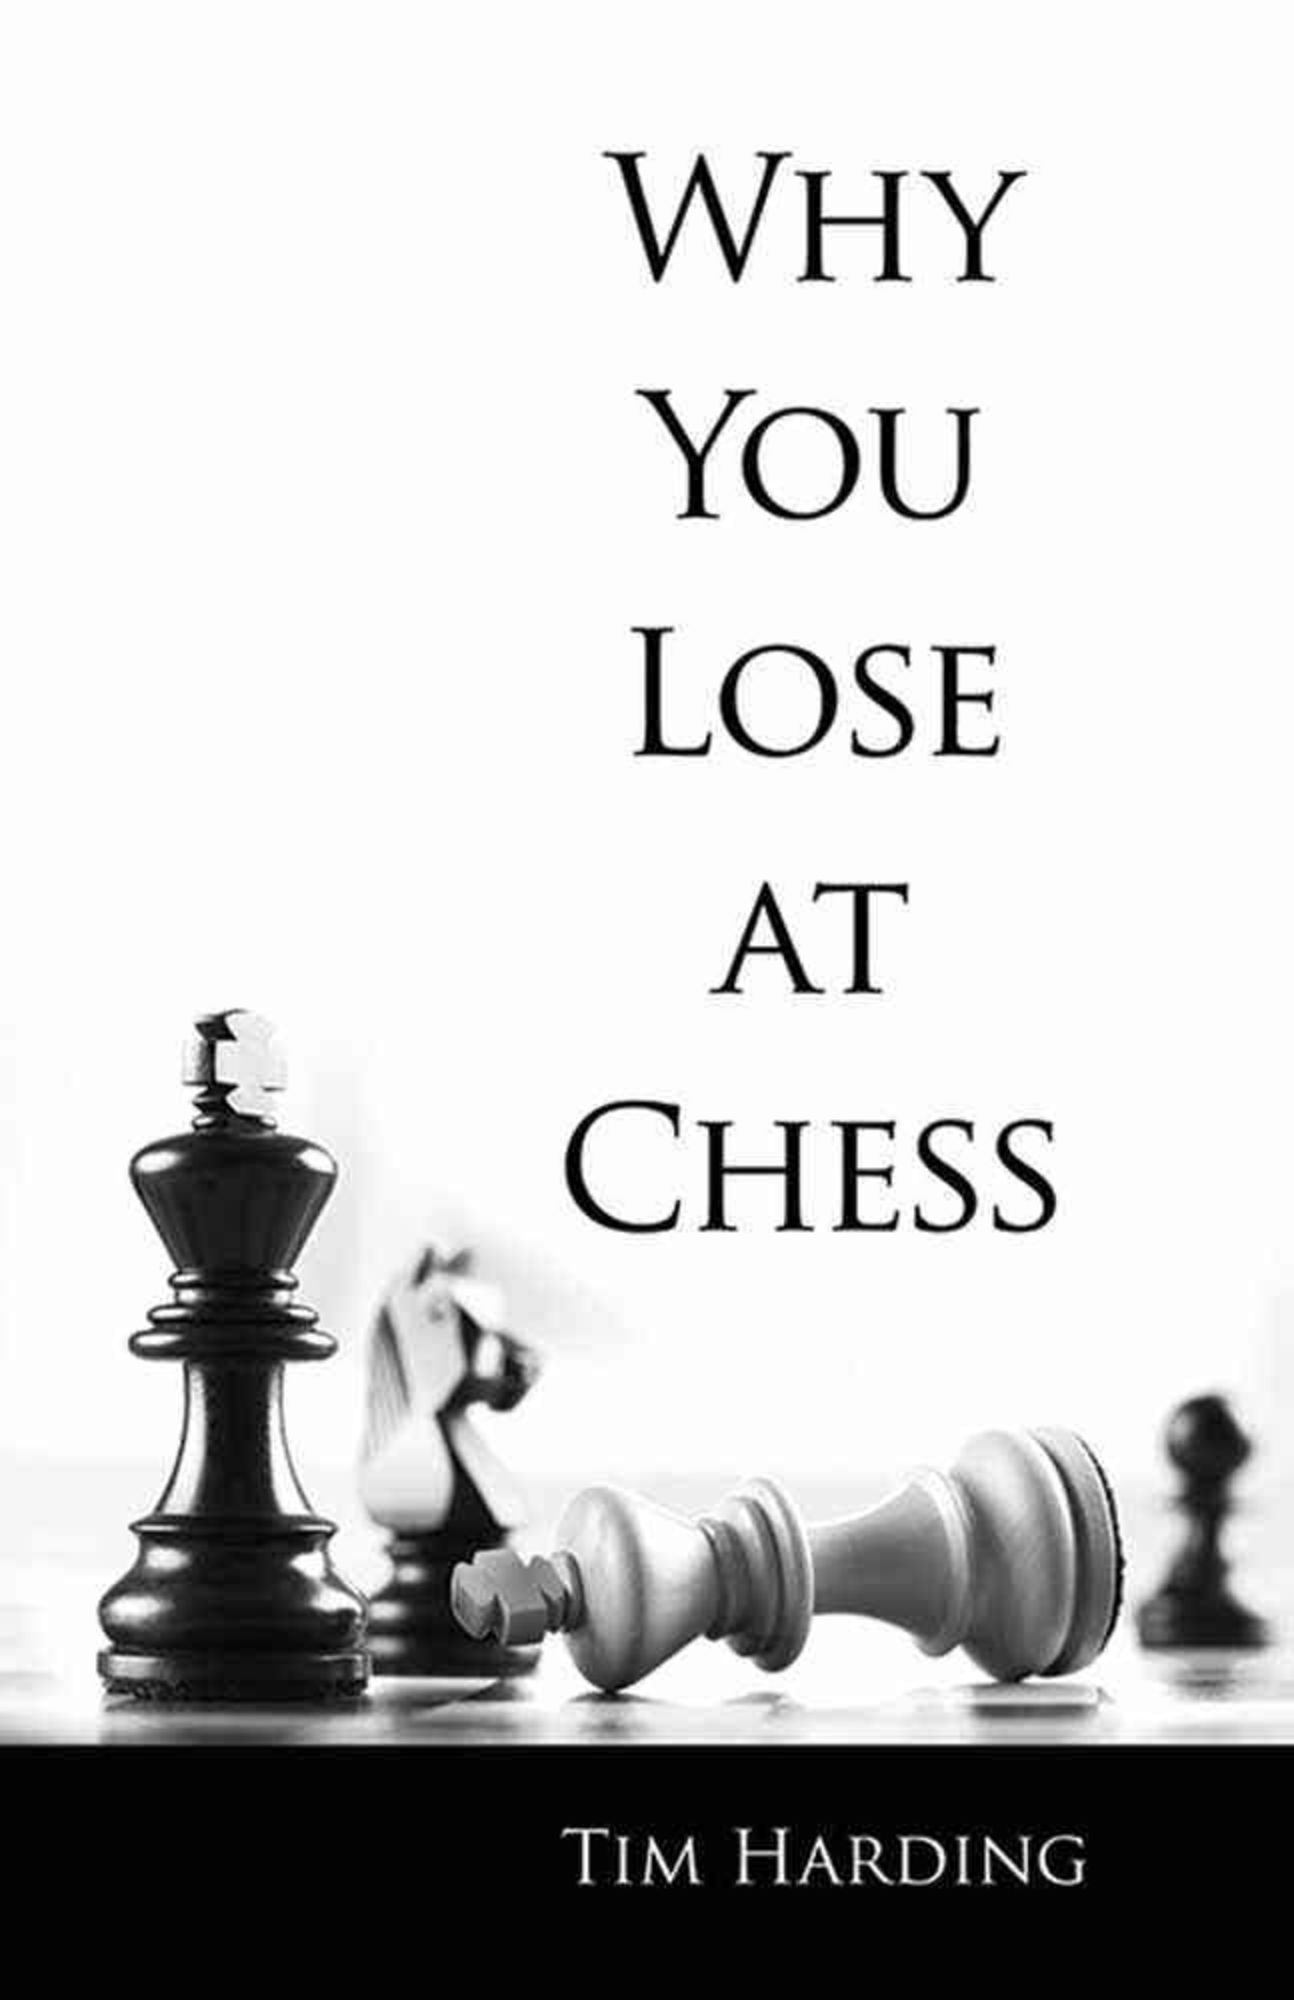 Learn Chess from the Greats by Peter J. Tamburro Jr., eBook